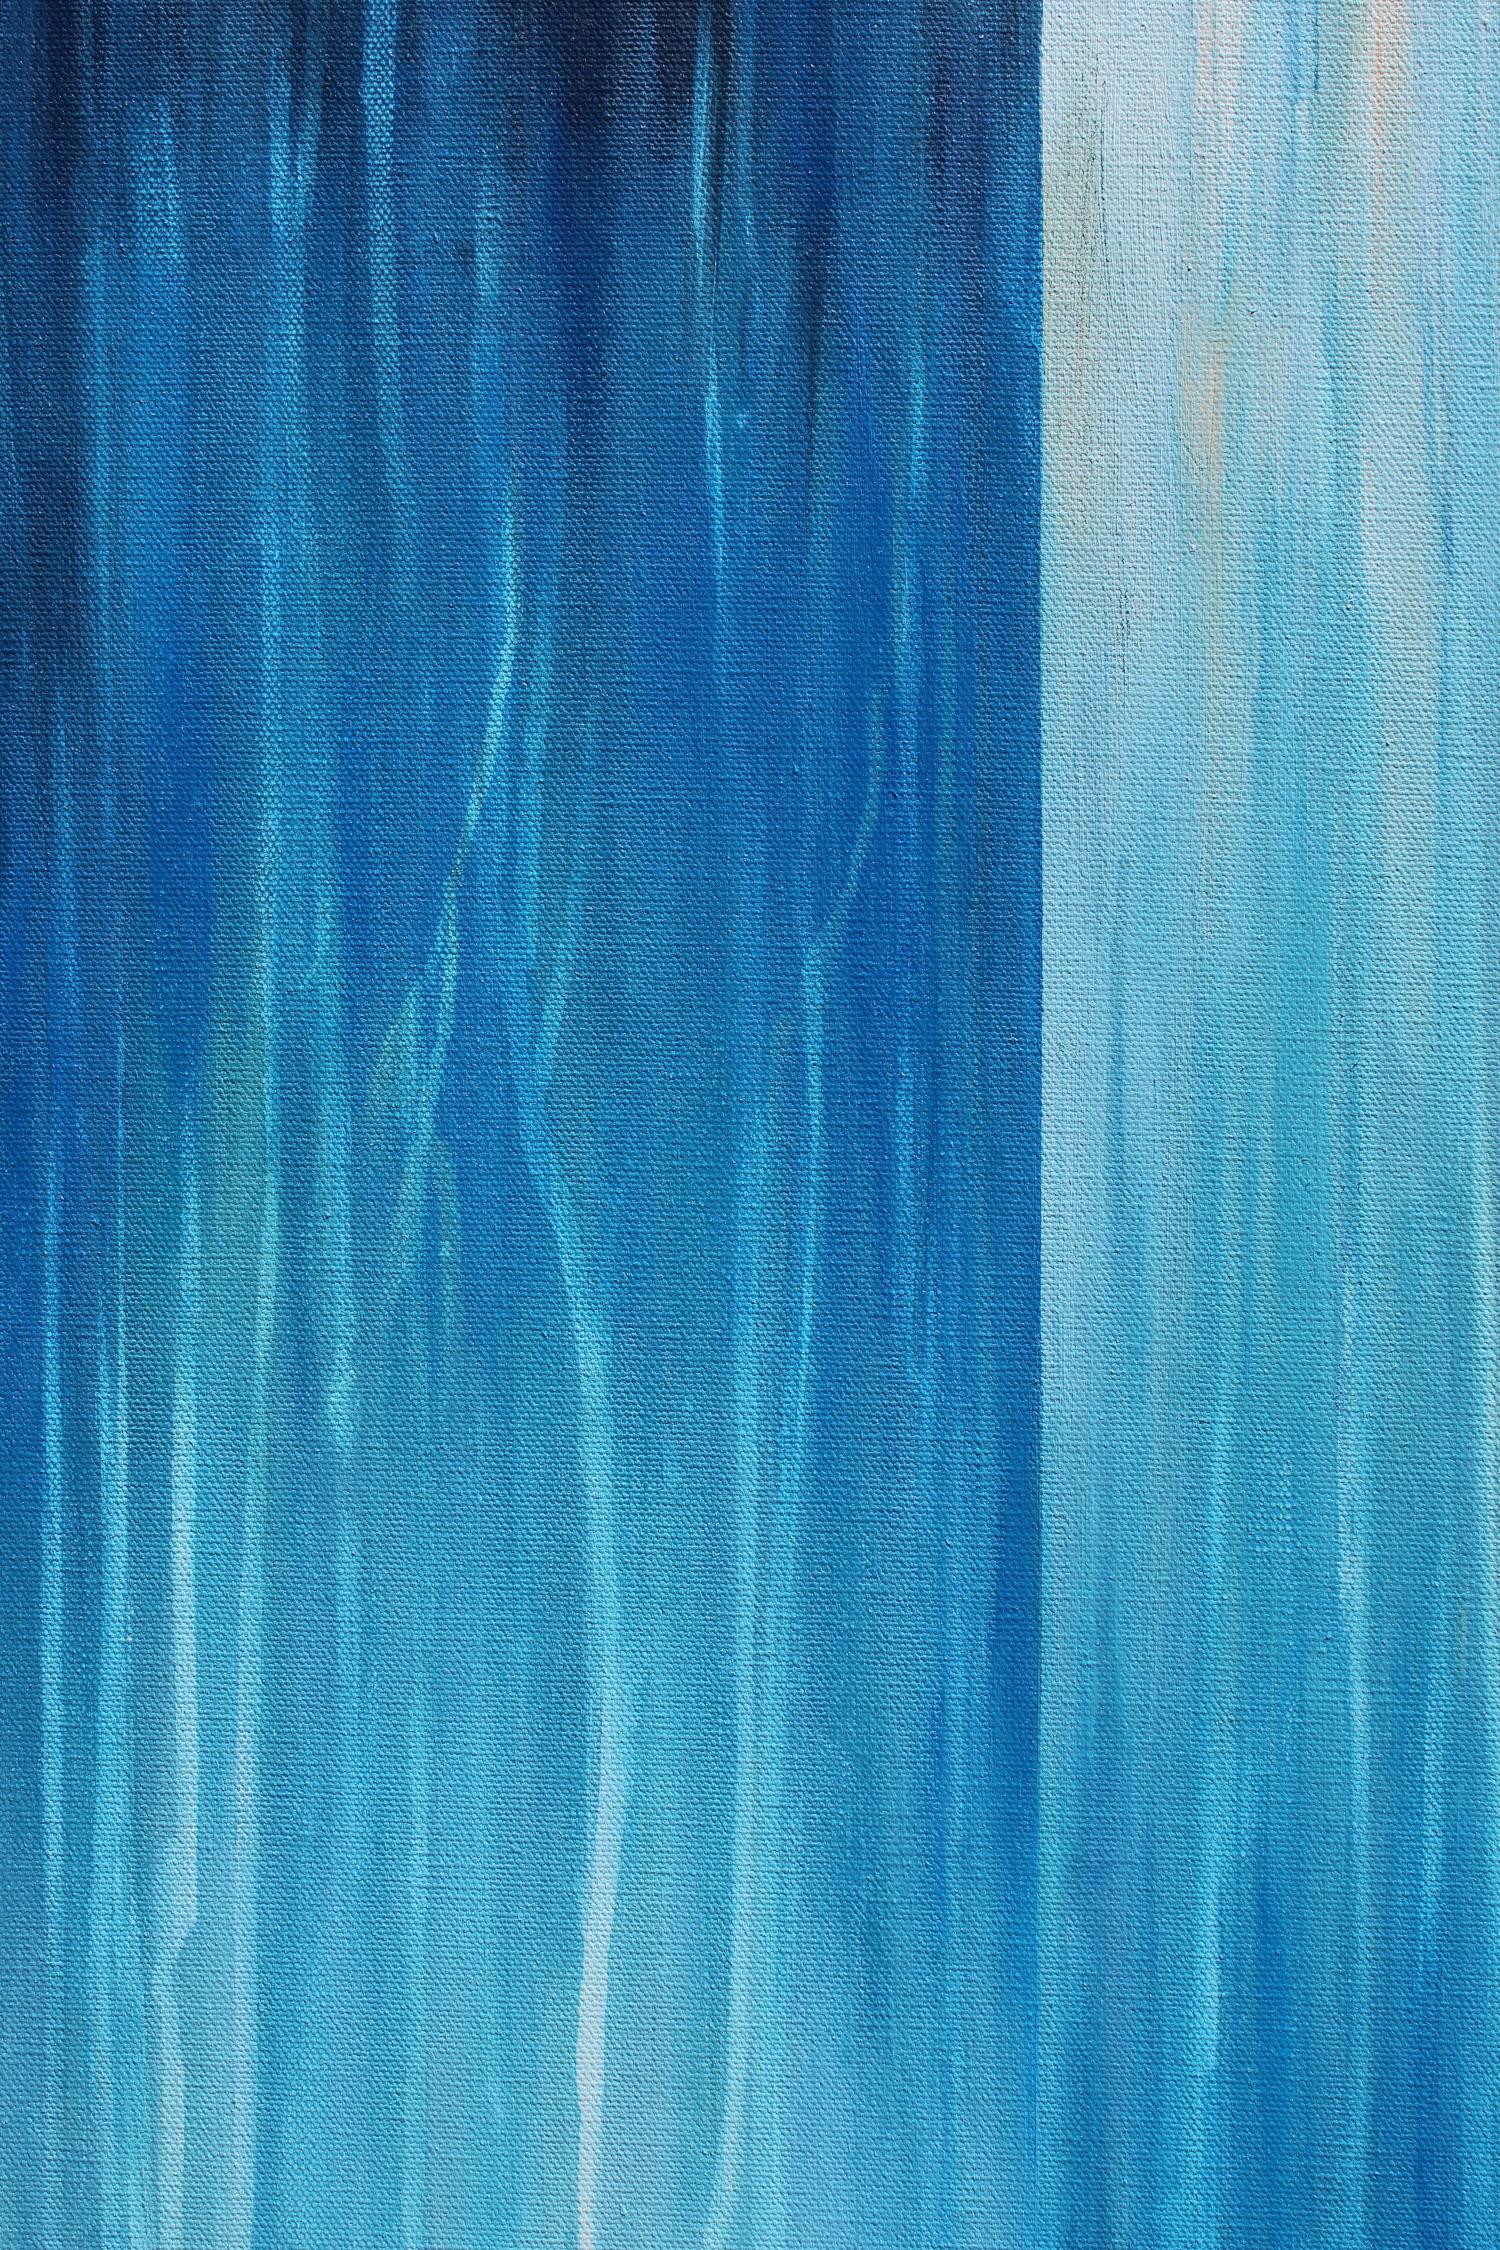 Diving In - Ocean Fury, Abstract Painting 1